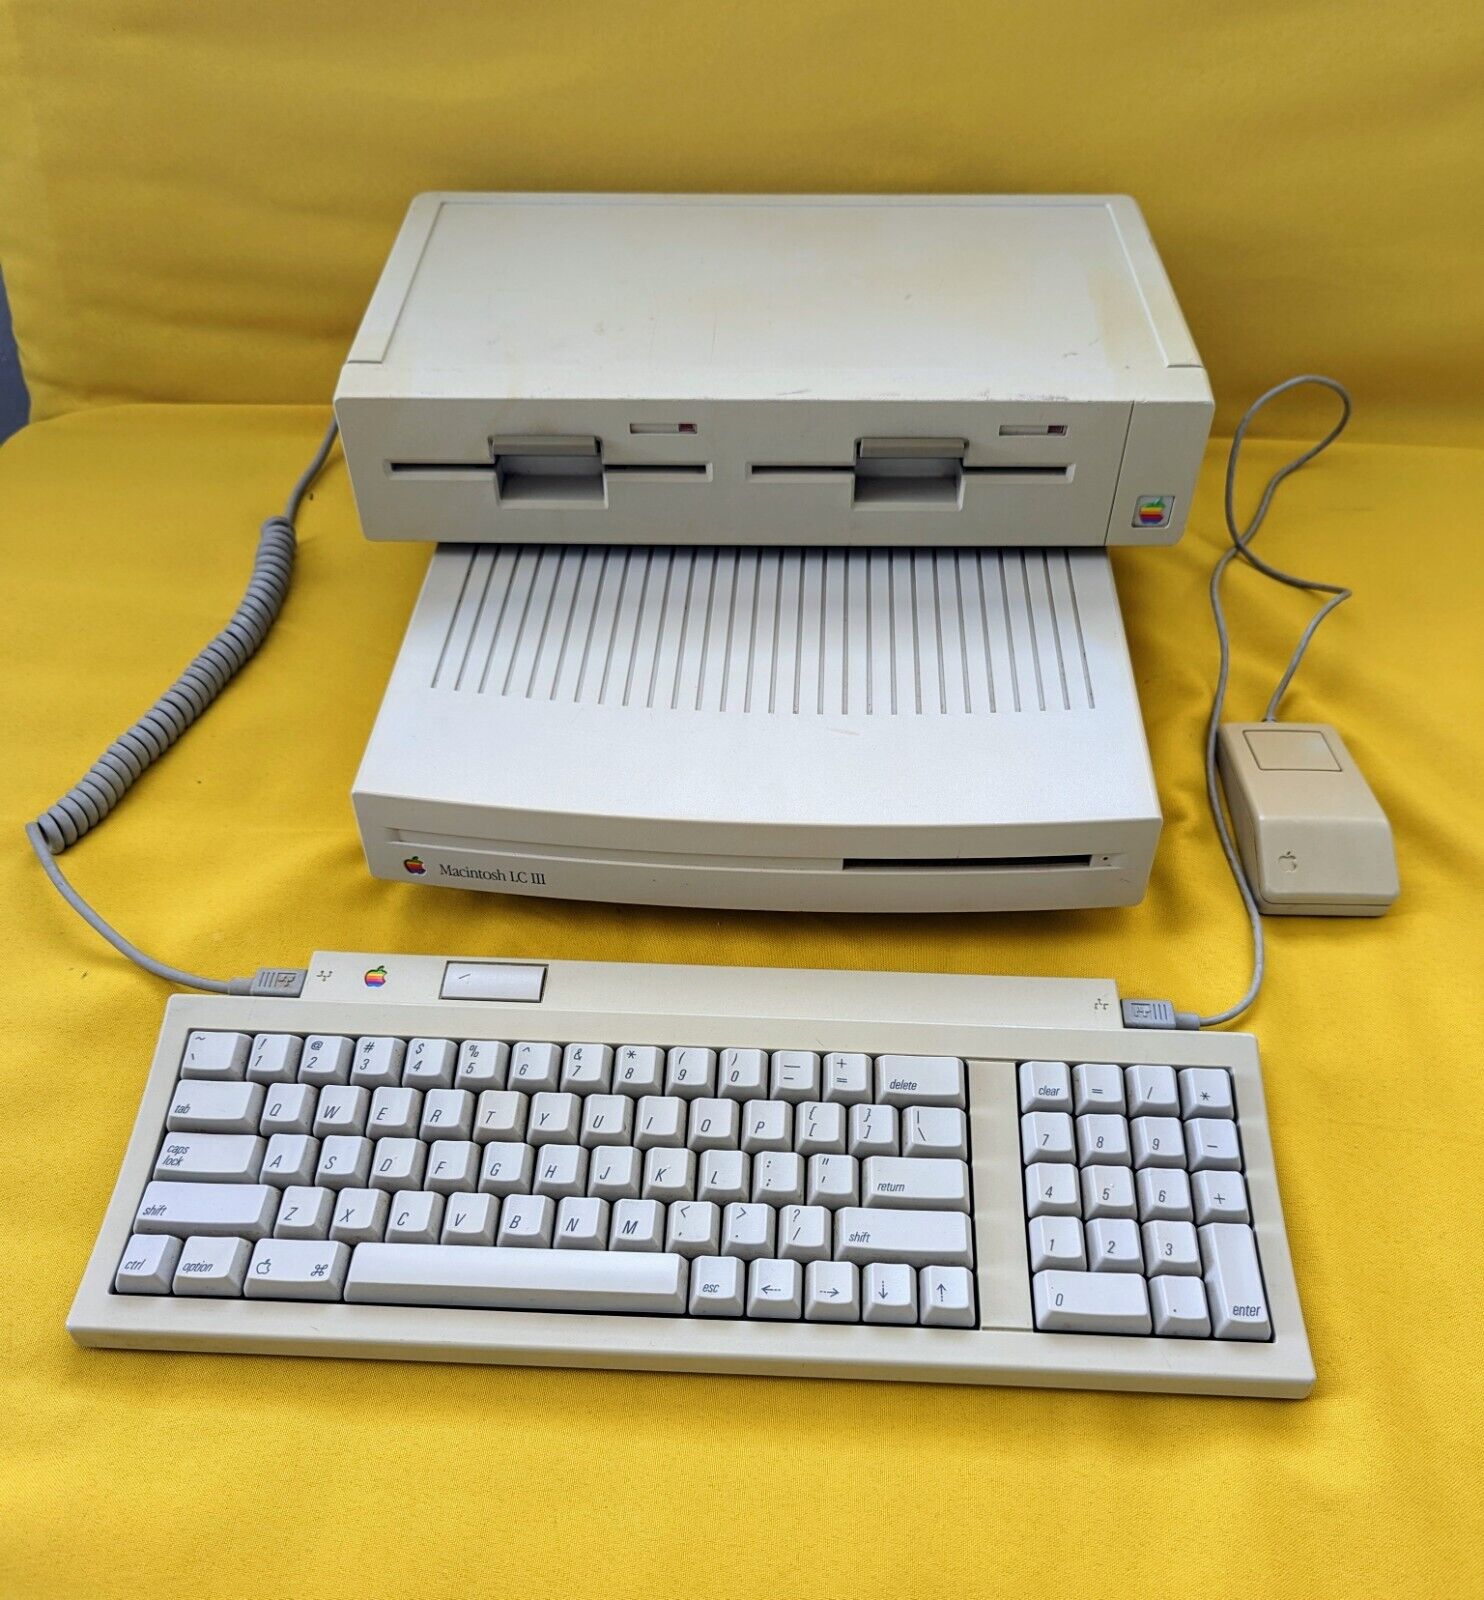 Apple Macintosh LC III with Duo Disk Drive, keyboard and mouse, Untested. AS-IS